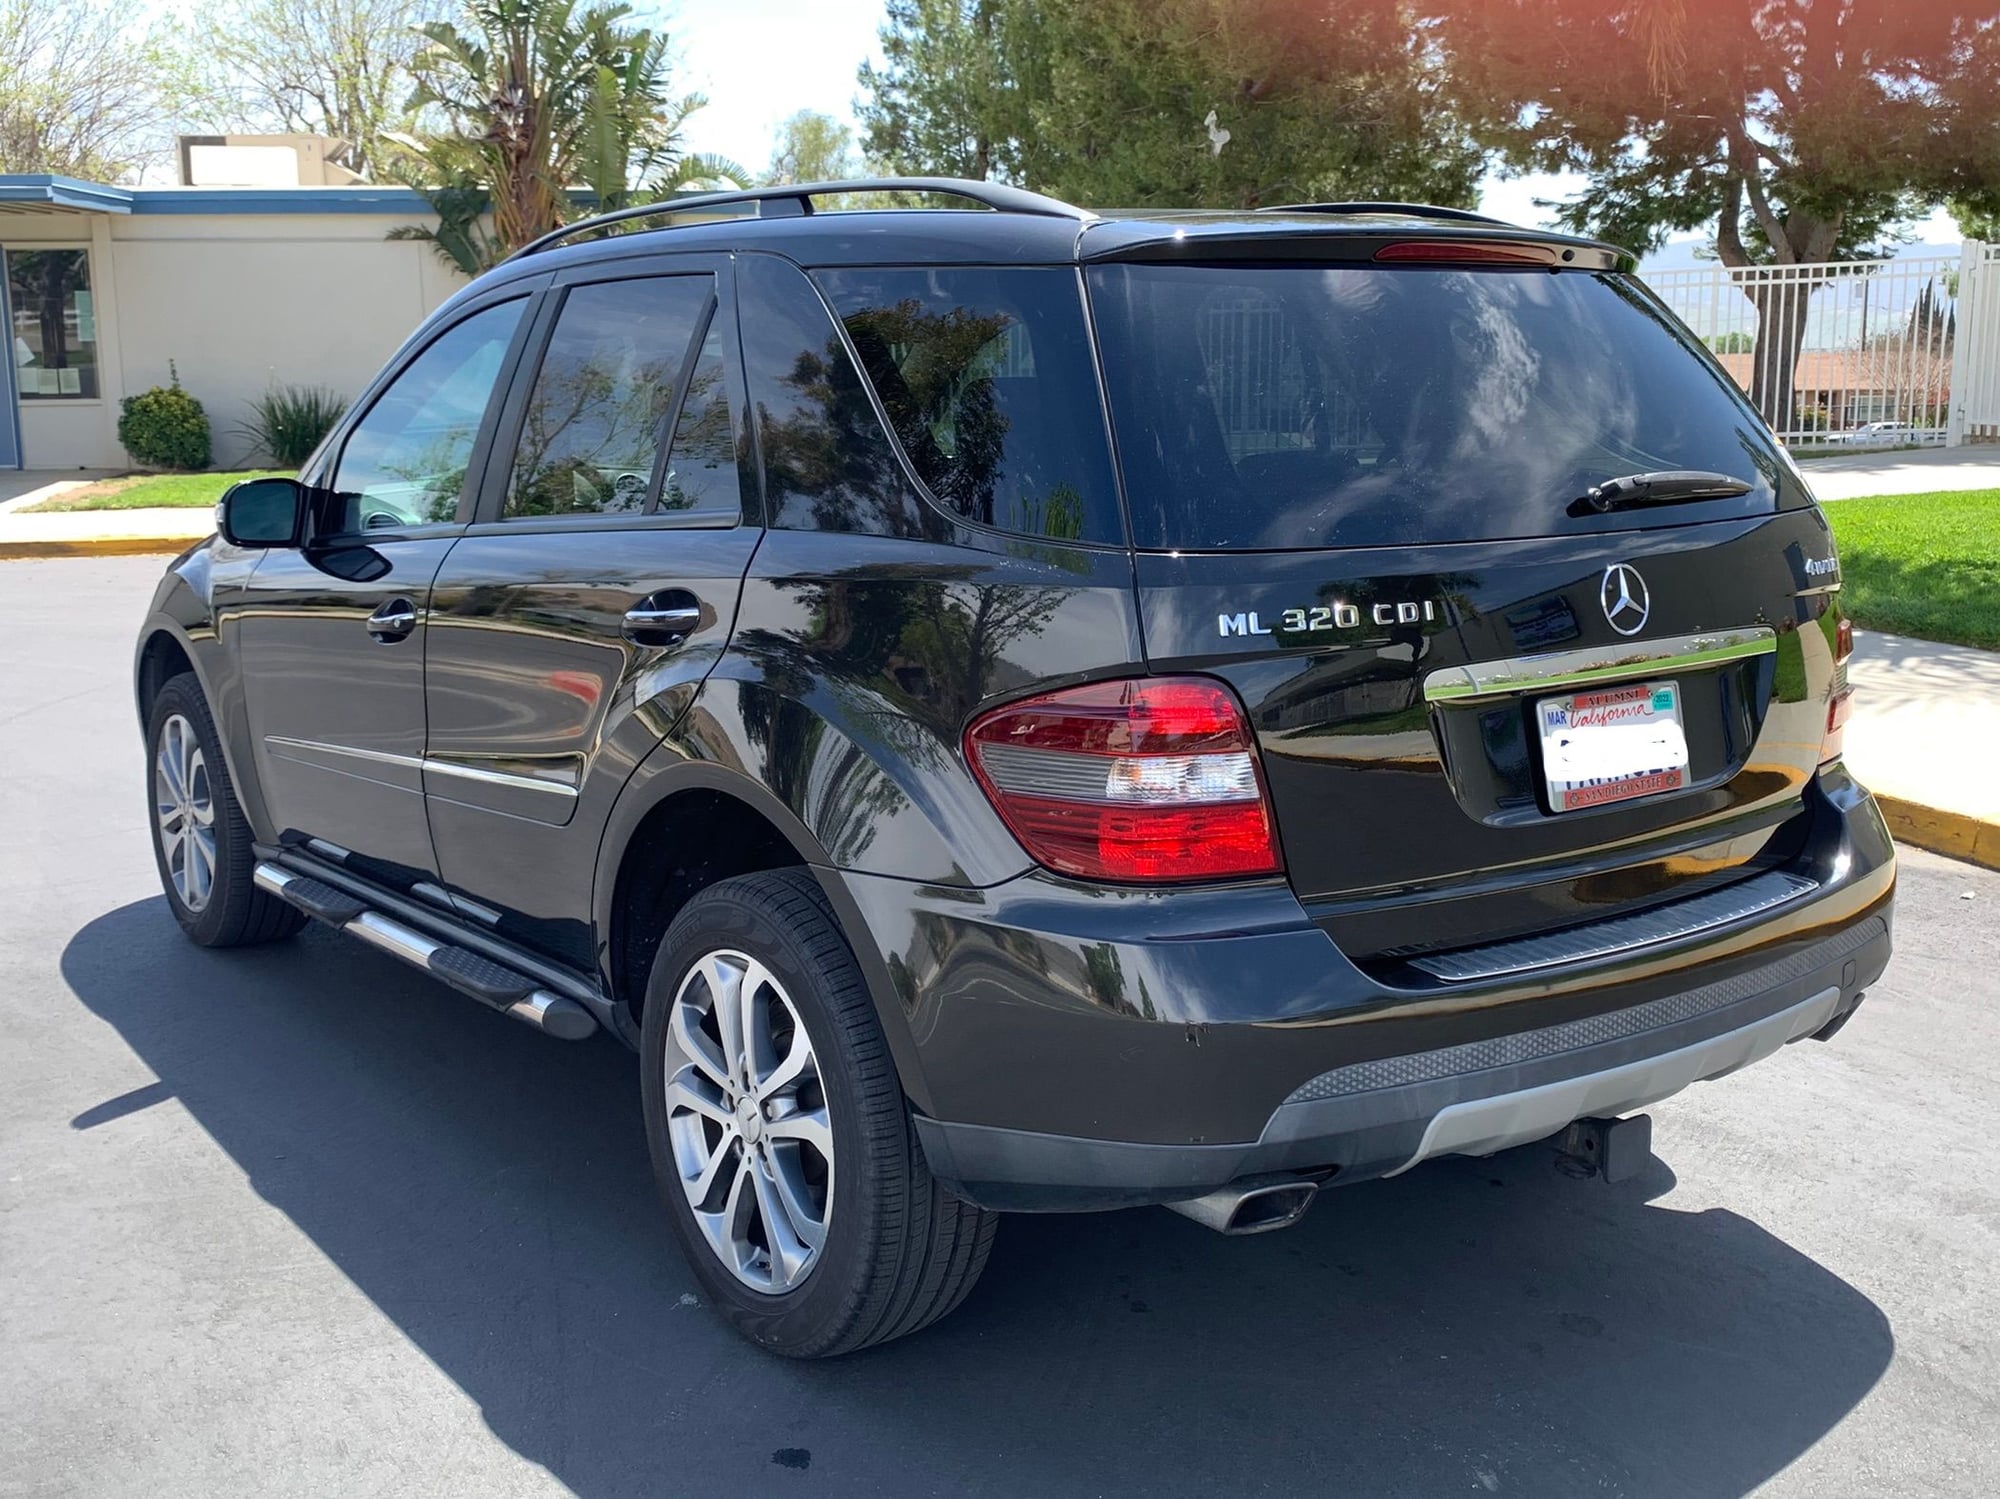 ML320 CDI Exposed -  Forums